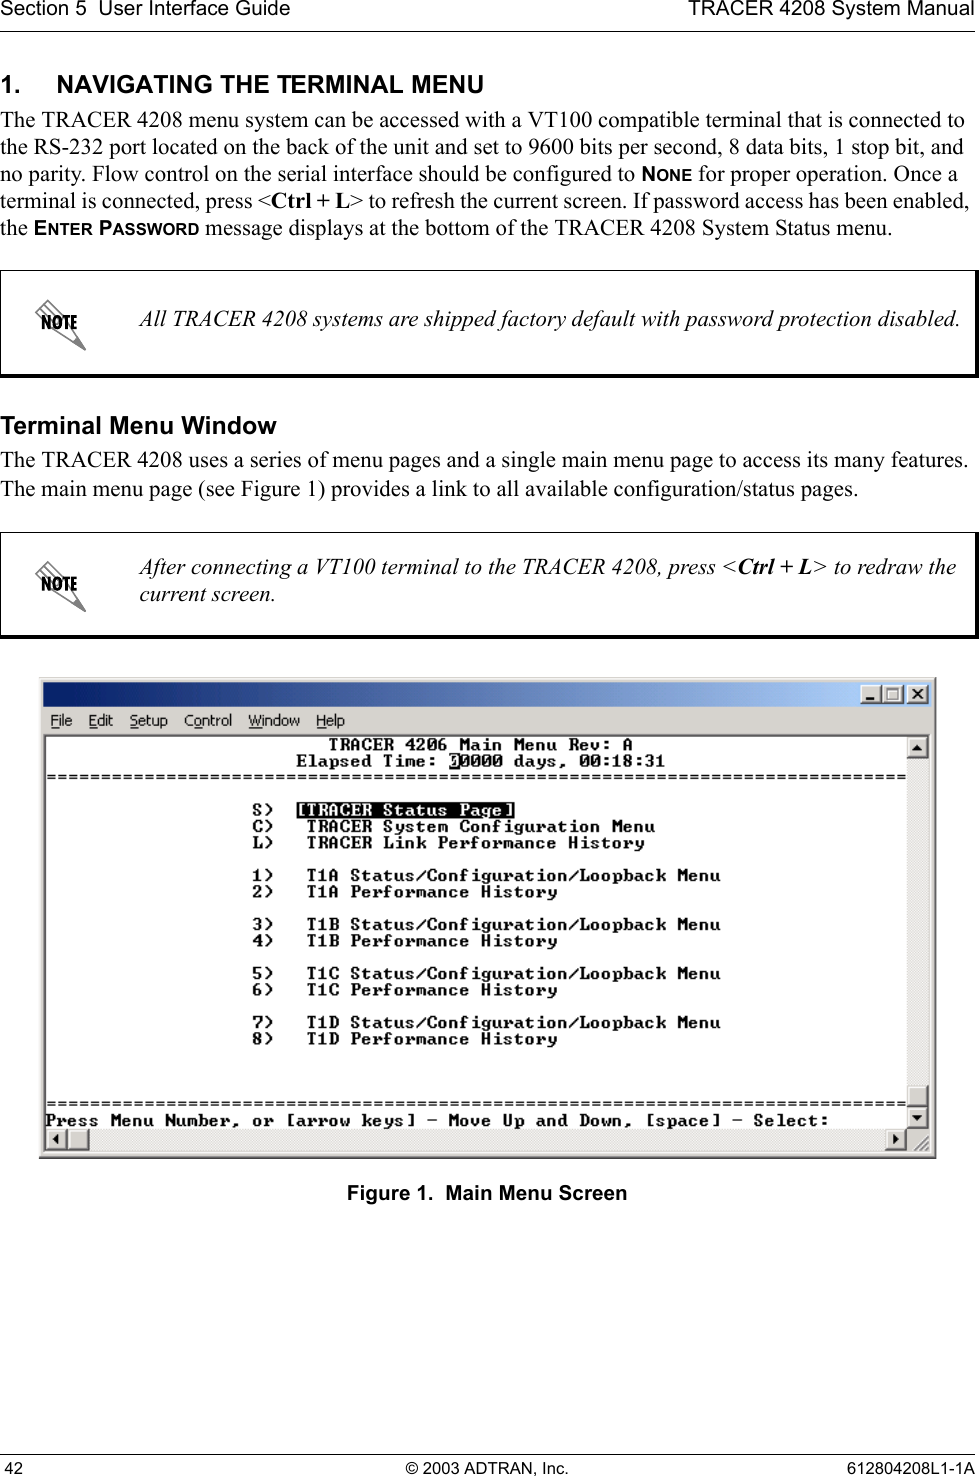 Section 5  User Interface Guide TRACER 4208 System Manual 42 © 2003 ADTRAN, Inc. 612804208L1-1A1. NAVIGATING THE TERMINAL MENUThe TRACER 4208 menu system can be accessed with a VT100 compatible terminal that is connected to the RS-232 port located on the back of the unit and set to 9600 bits per second, 8 data bits, 1 stop bit, and no parity. Flow control on the serial interface should be configured to NONE for proper operation. Once a terminal is connected, press &lt;Ctrl + L&gt; to refresh the current screen. If password access has been enabled, the ENTER PASSWORD message displays at the bottom of the TRACER 4208 System Status menu. Terminal Menu WindowThe TRACER 4208 uses a series of menu pages and a single main menu page to access its many features. The main menu page (see Figure 1) provides a link to all available configuration/status pages.Figure 1.  Main Menu ScreenAll TRACER 4208 systems are shipped factory default with password protection disabled.After connecting a VT100 terminal to the TRACER 4208, press &lt;Ctrl + L&gt; to redraw the current screen.